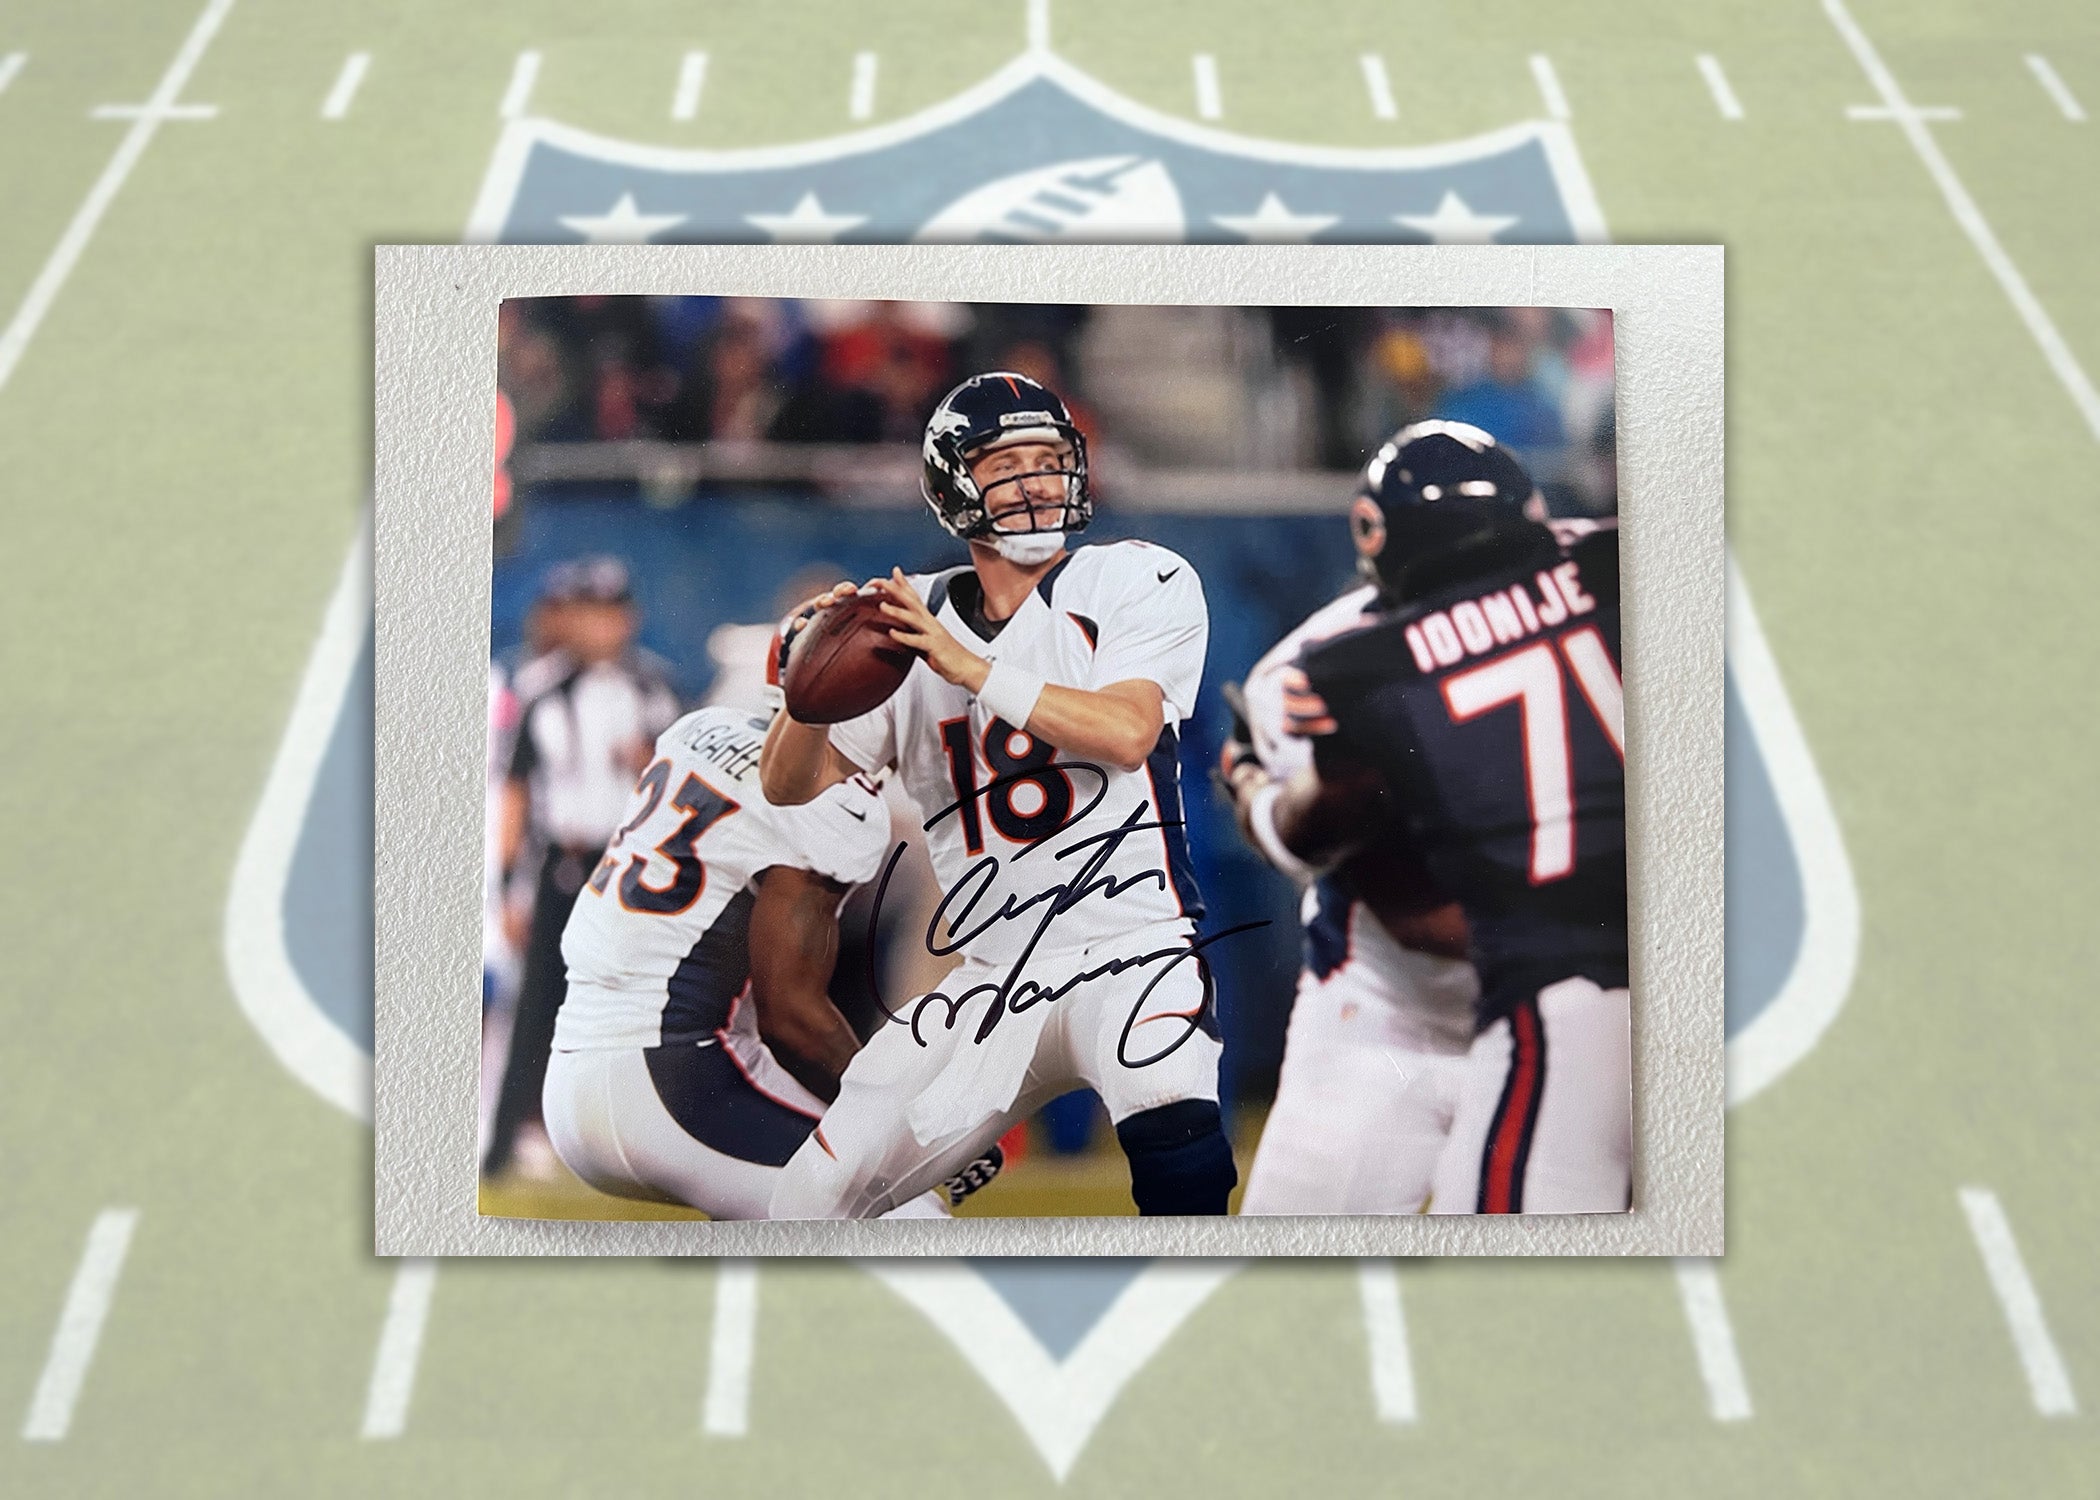 Peyton Manning Denver Broncos 8x10 photo signed with proof